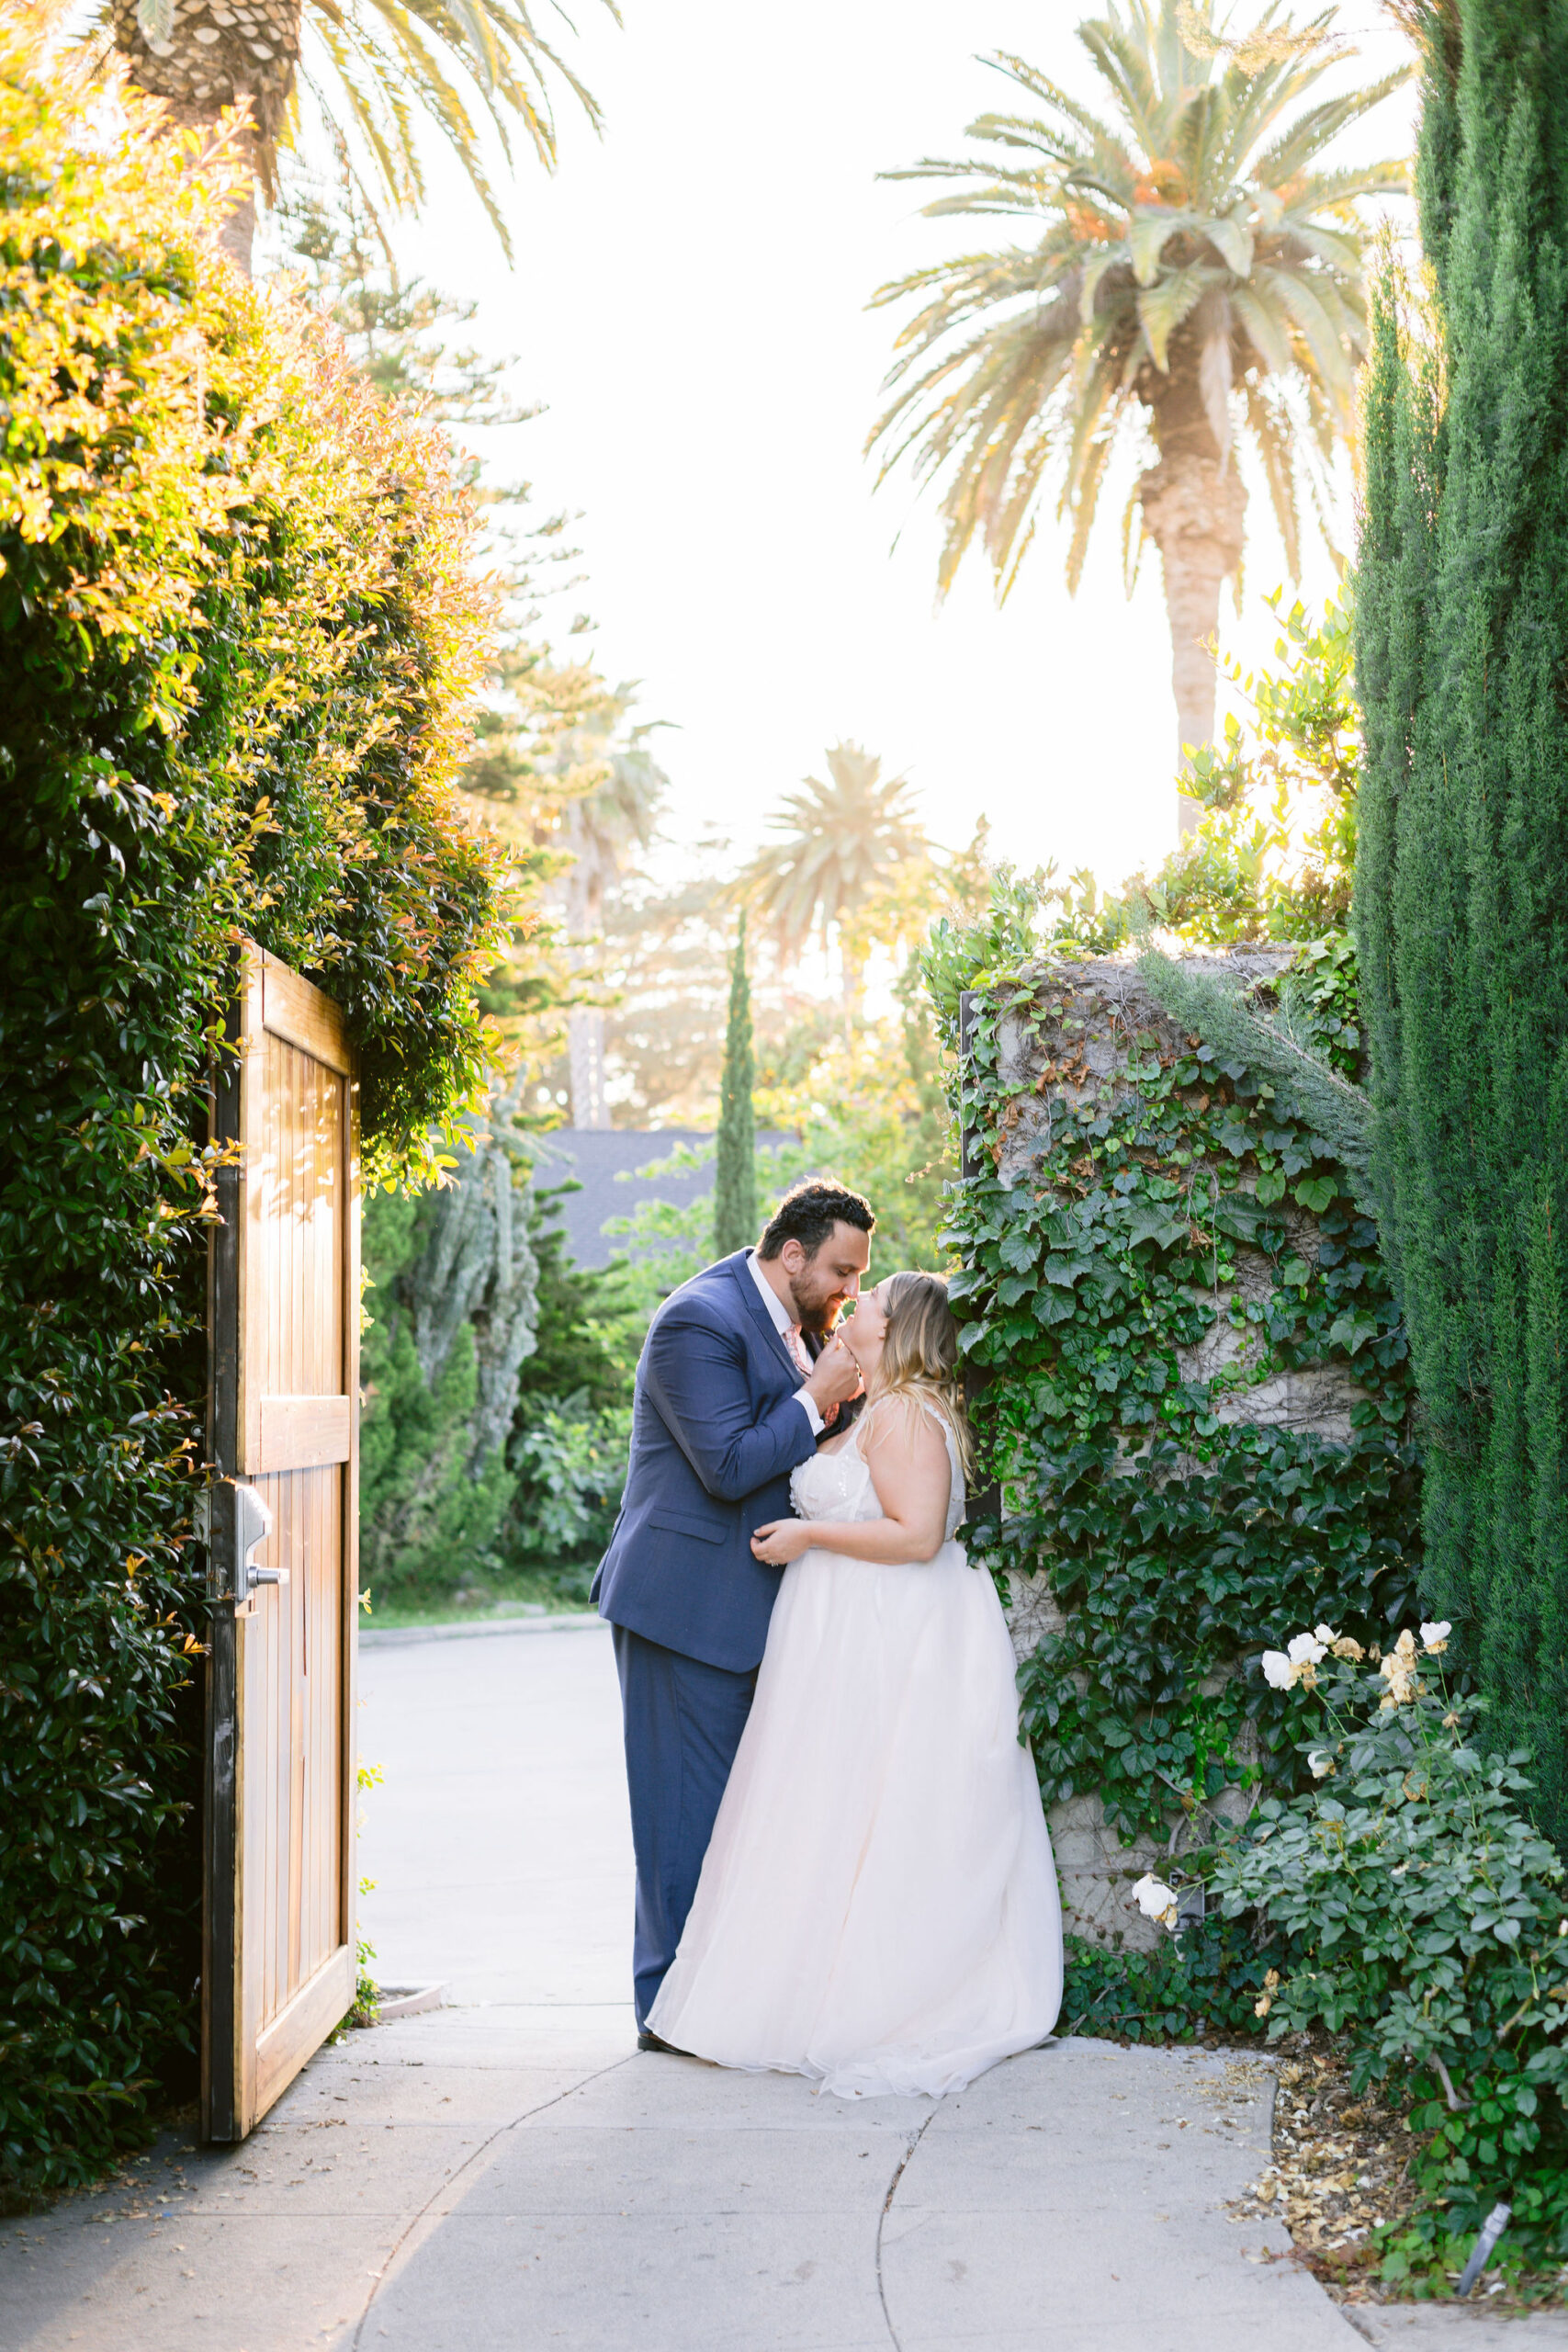 NEWLYWEDS KISSING ON THE ENTRANCE WHILE THE SUN SETS IN THE BACKGROUND